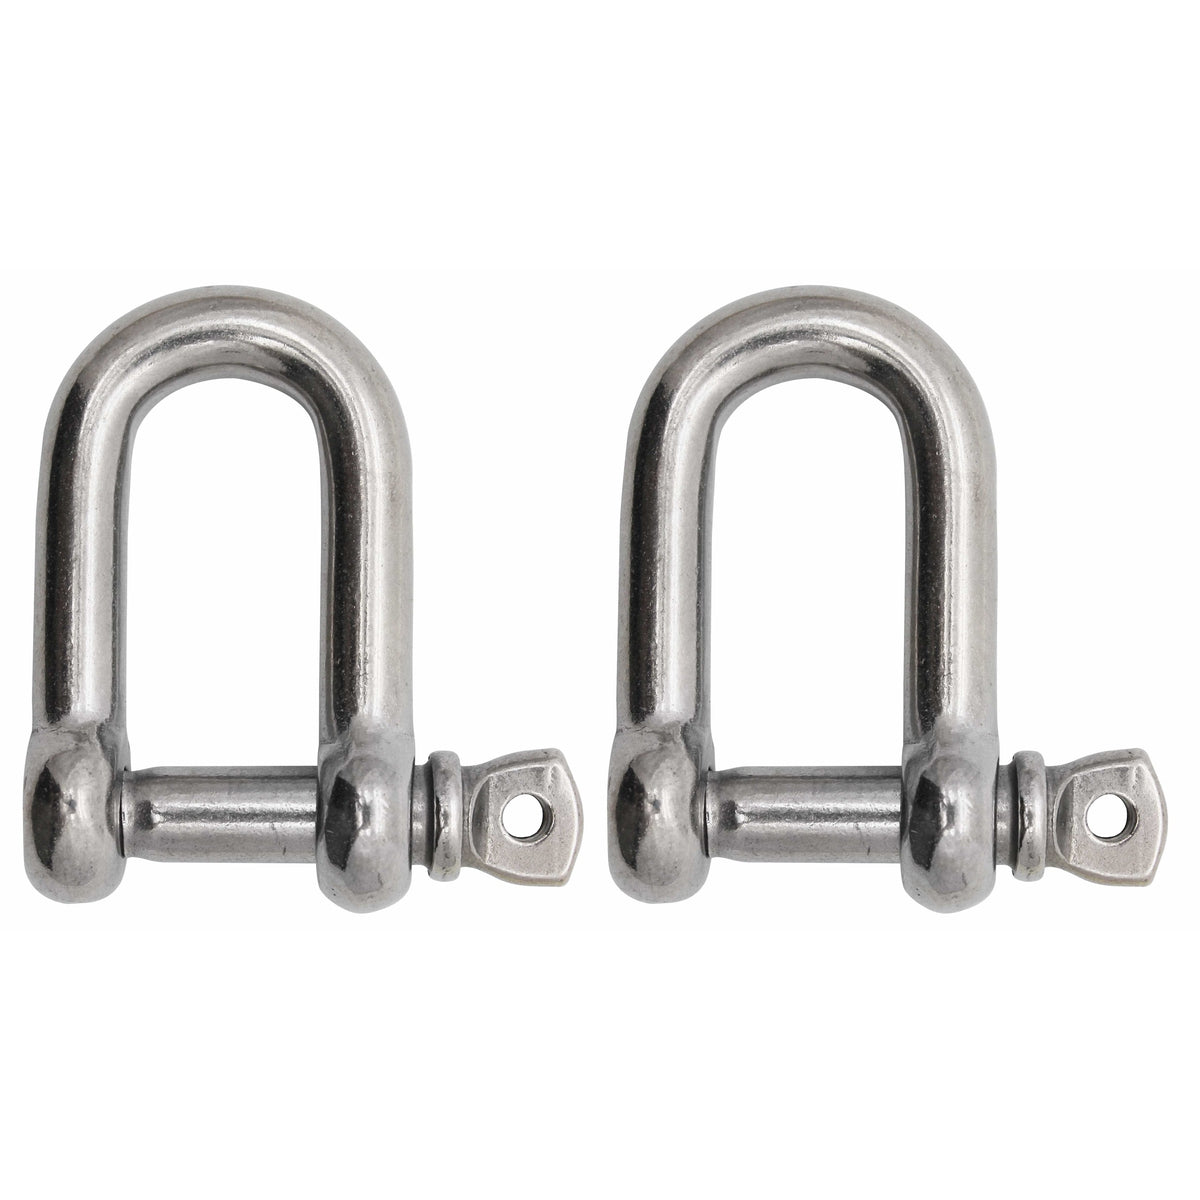 Extreme Max BoatTector SS D Shackle 1/4" 2-pk #3006.8237.2